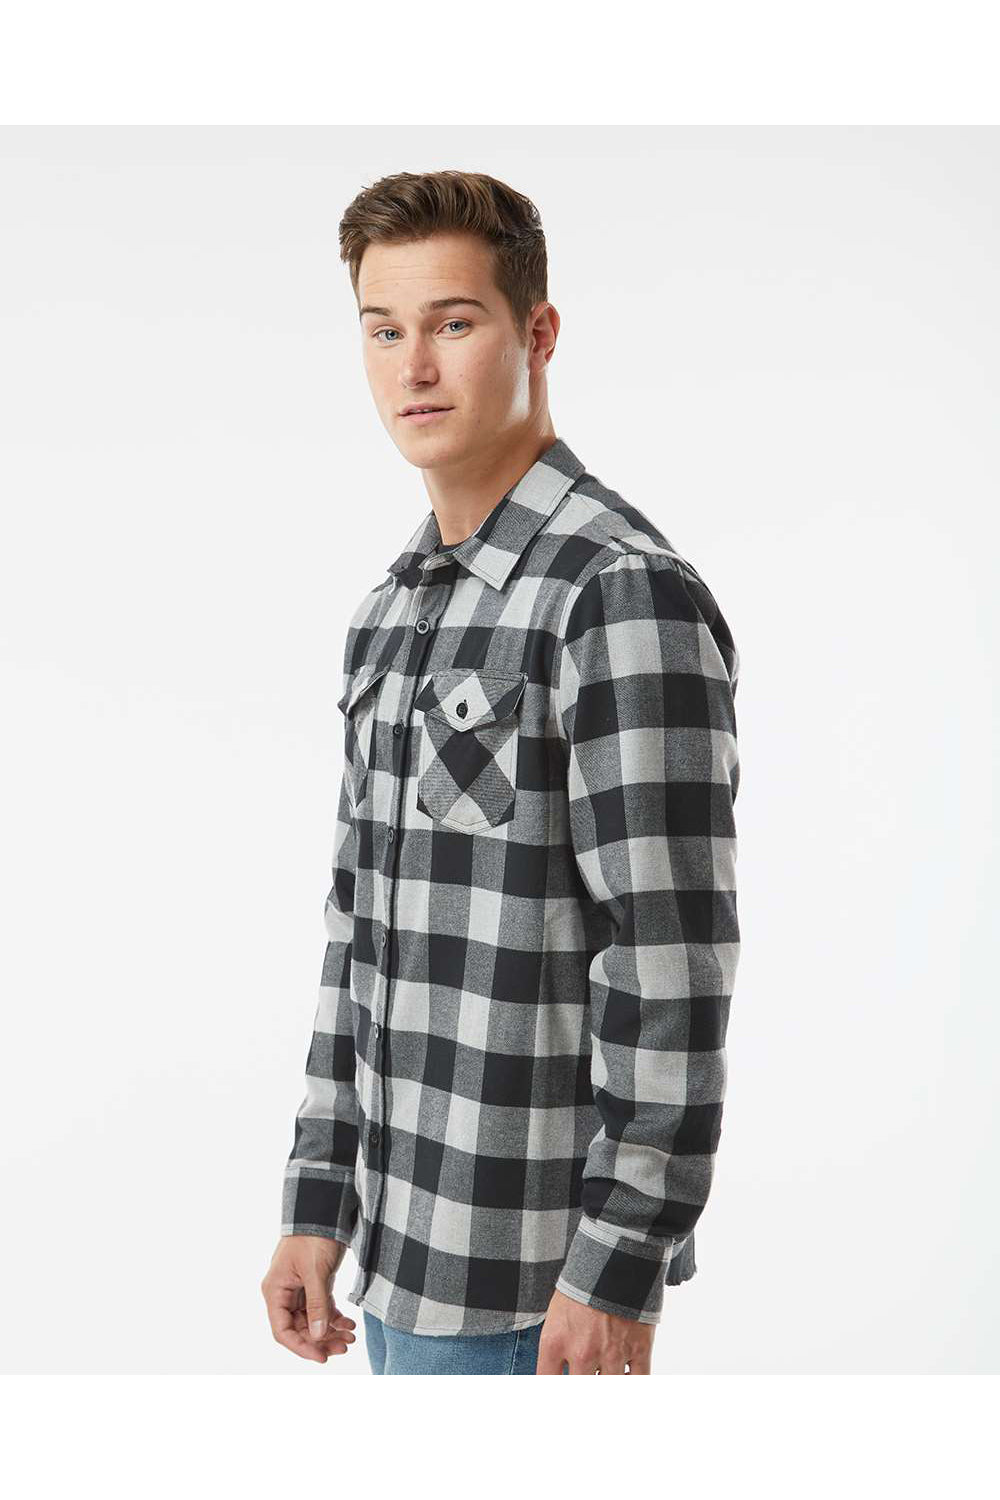 Independent Trading Co. EXP50F Mens Long Sleeve Button Down Flannel Shirt w/ Double Pockets Heather Grey/Black Model Side